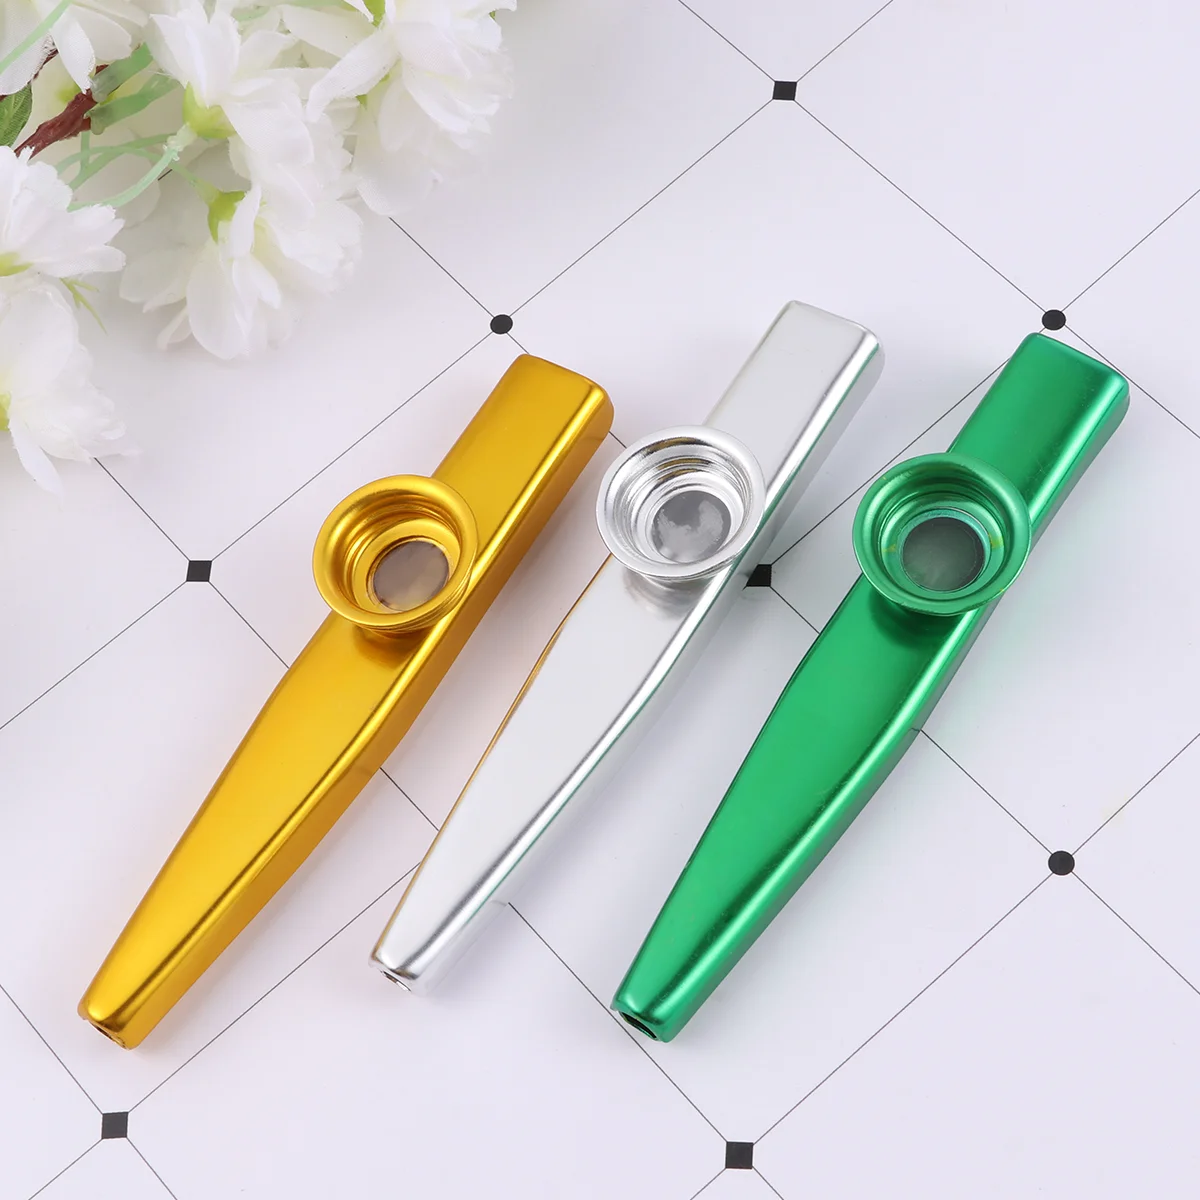 

6pcs Different Colors Metal Kazoos Preschool Educational Toys Musical Instruments Flutes for Kids (Gold, Silver, Blue, Green,